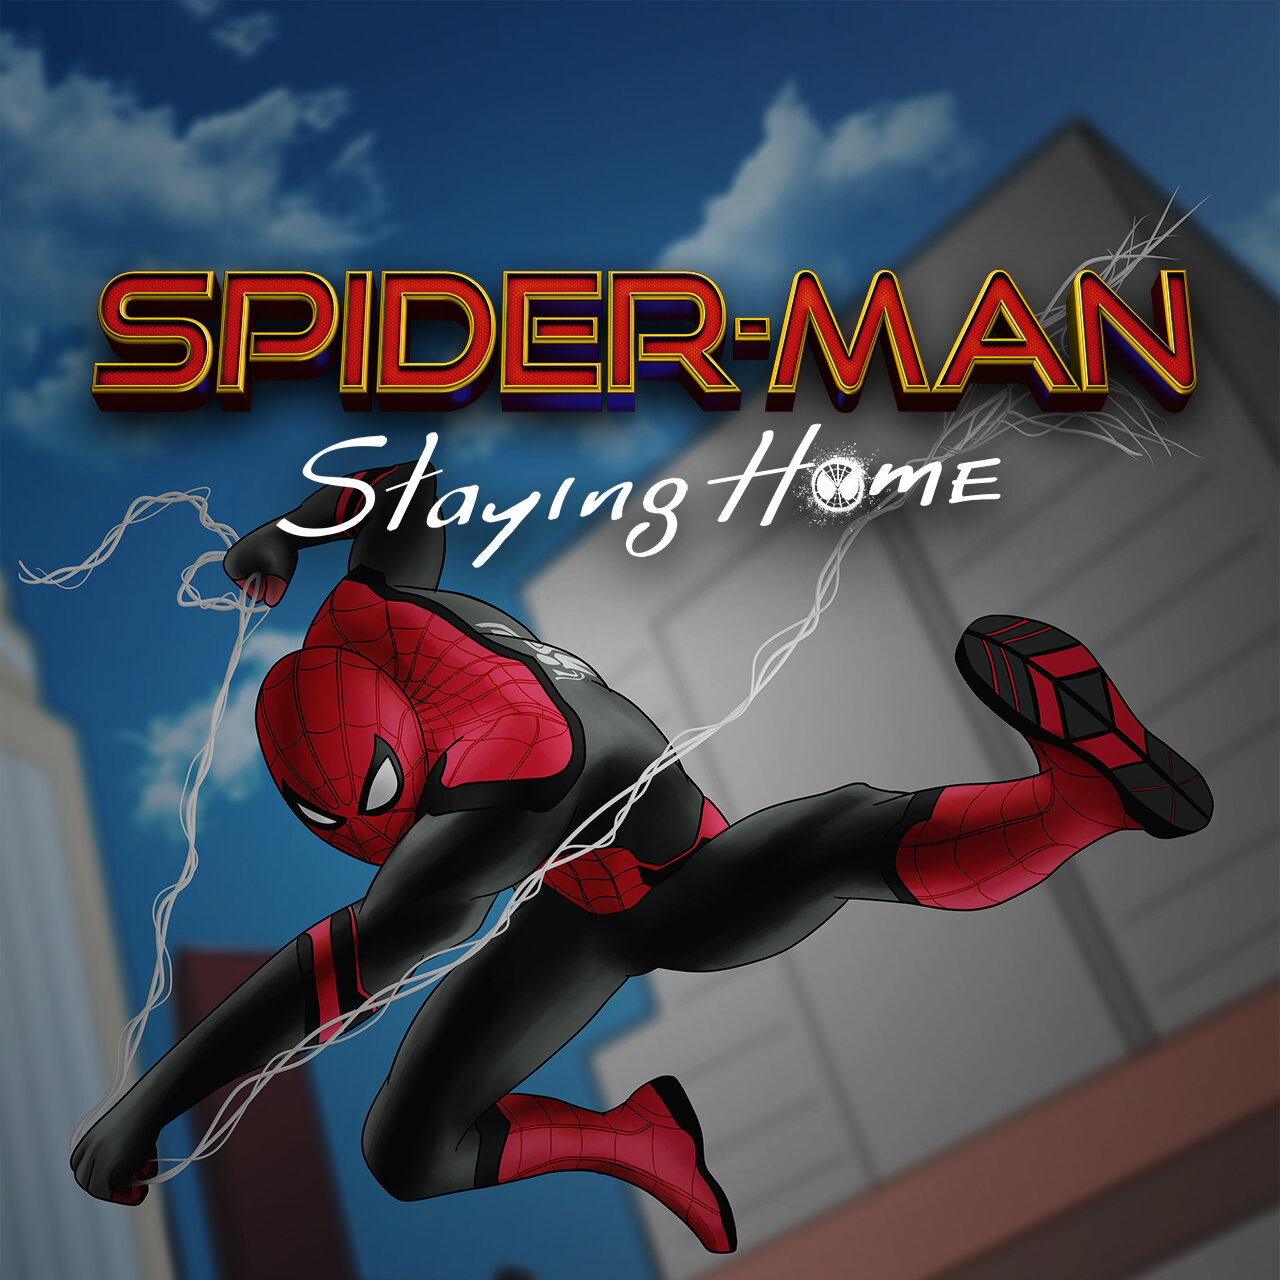 Spider-Man: Staying Home